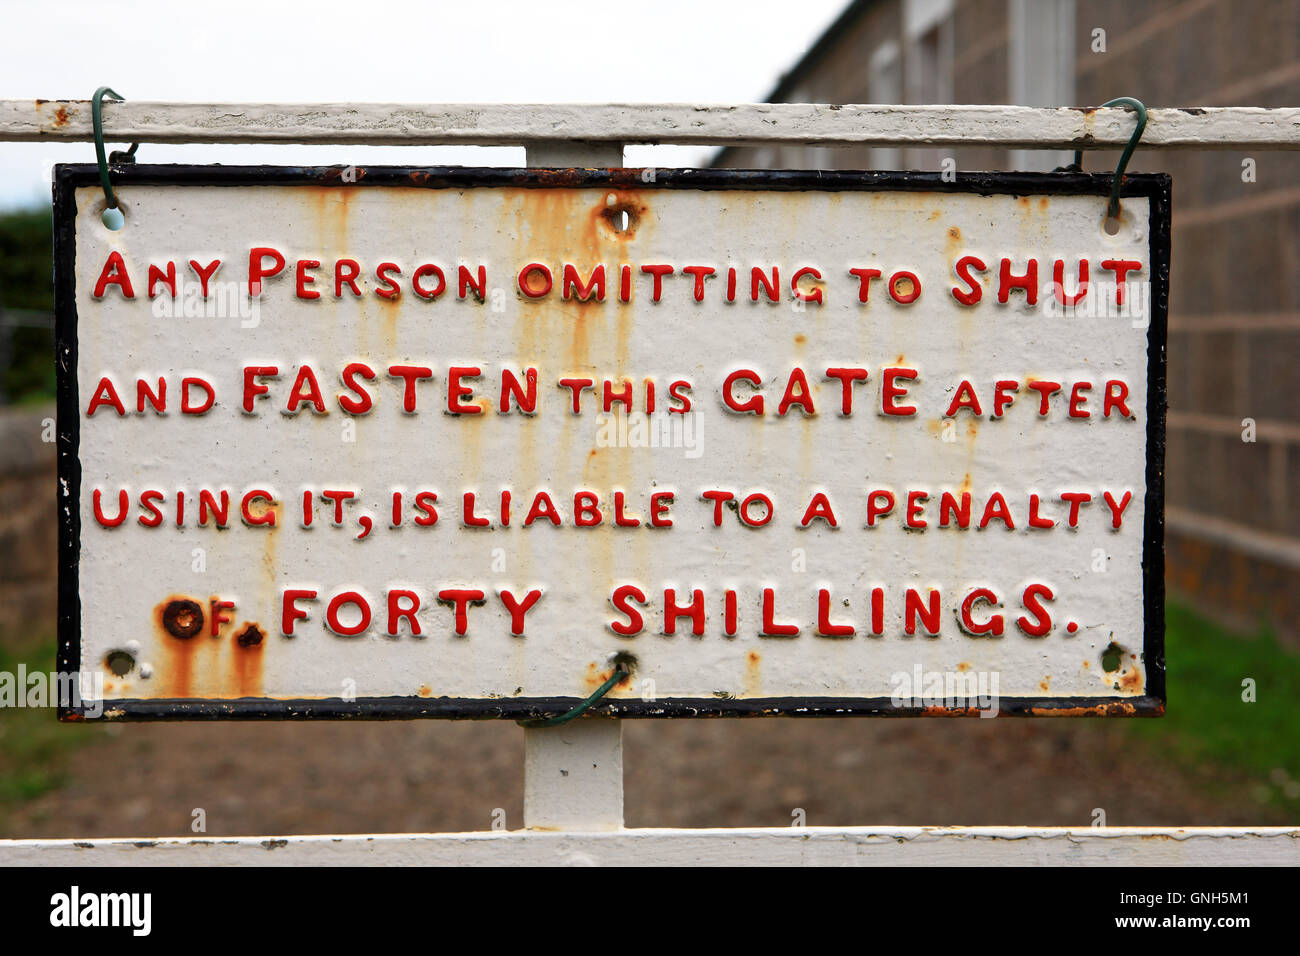 Old gate sign 'Any person omitting to shut and fasten this gate after using it, is liable to a penalty of Forty Shillings' Stock Photo